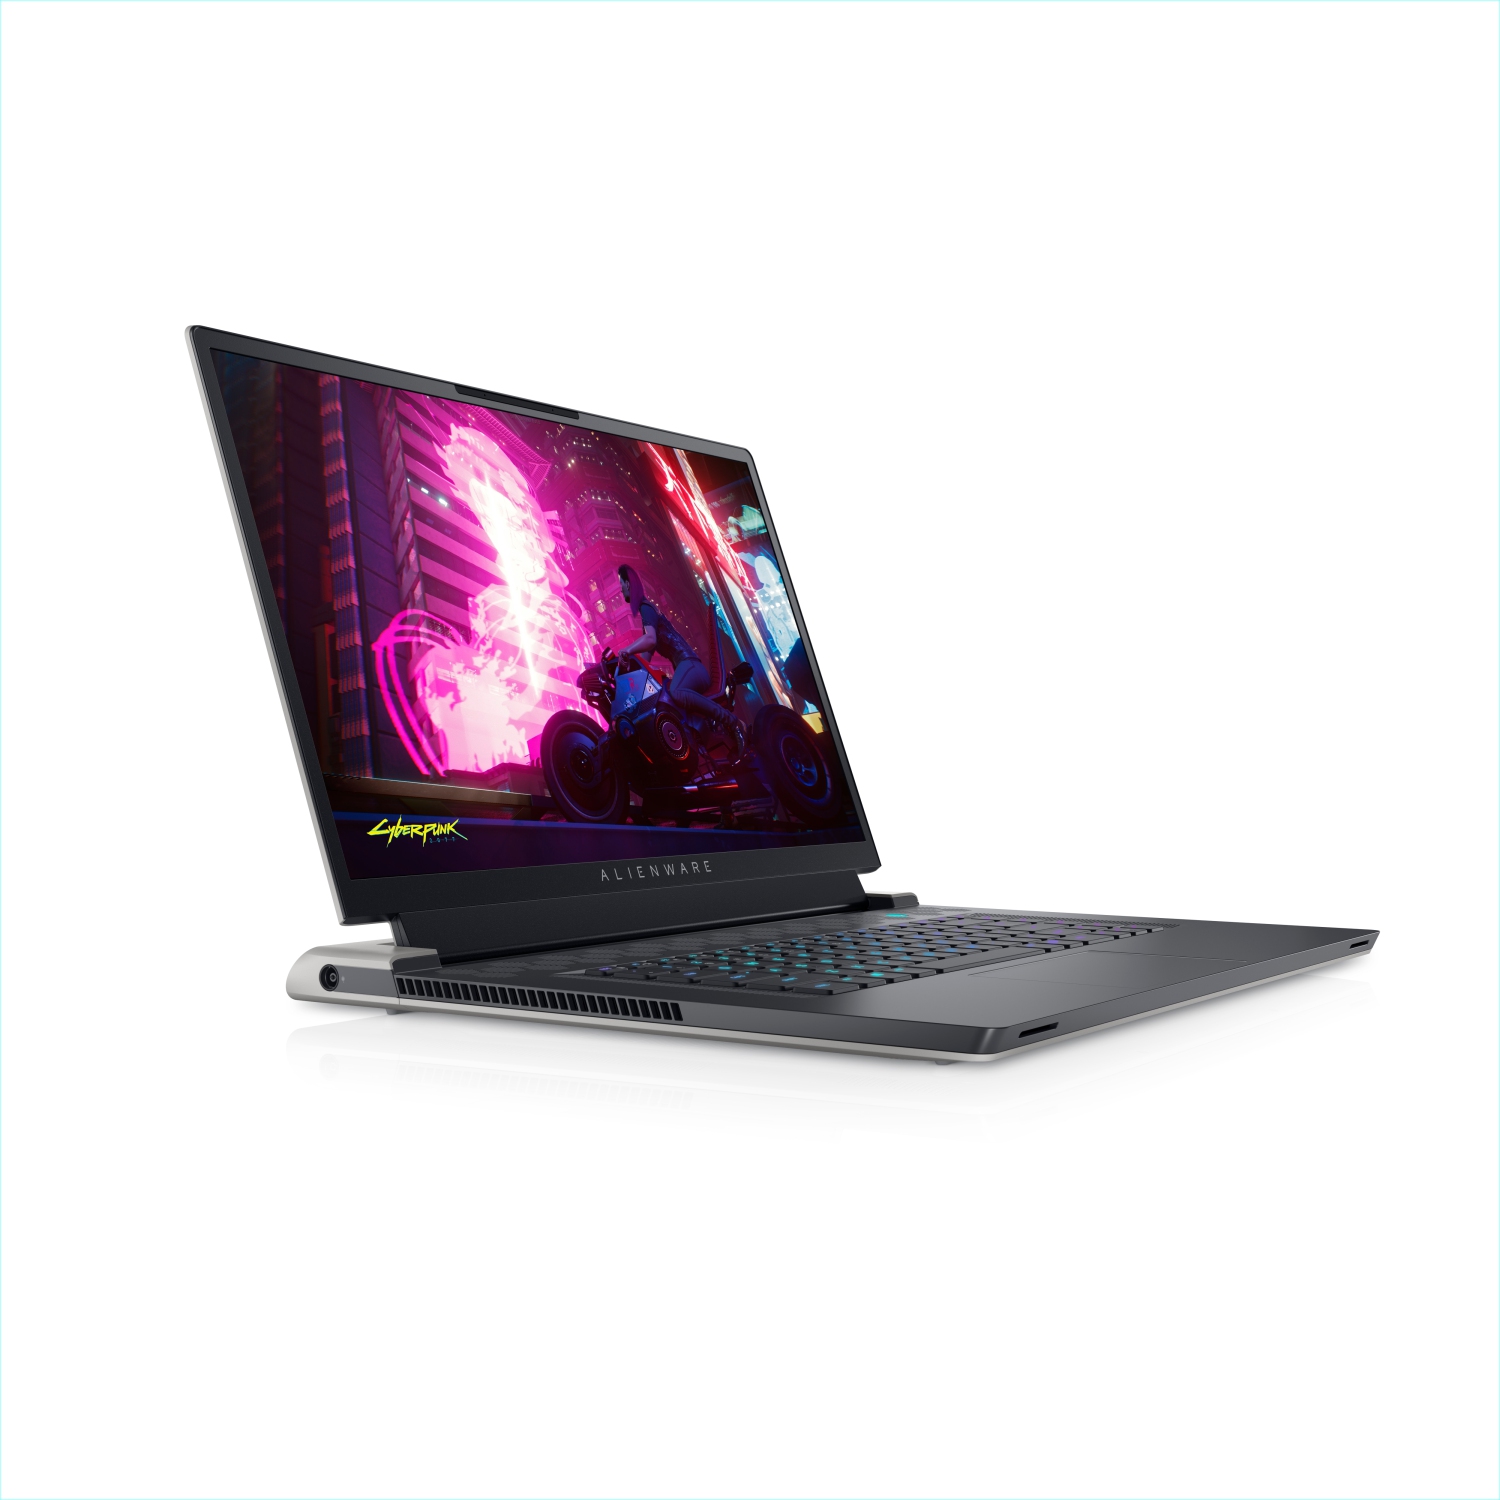 Refurbished (Excellent) - Dell Alienware X17 R1 Gaming Laptop (2021), 17.3" 4K, Core i9, 512GB SSD, 32GB RAM, RTX 3080, 8 Cores @ 5 GHz, 11th Gen CPU Certified